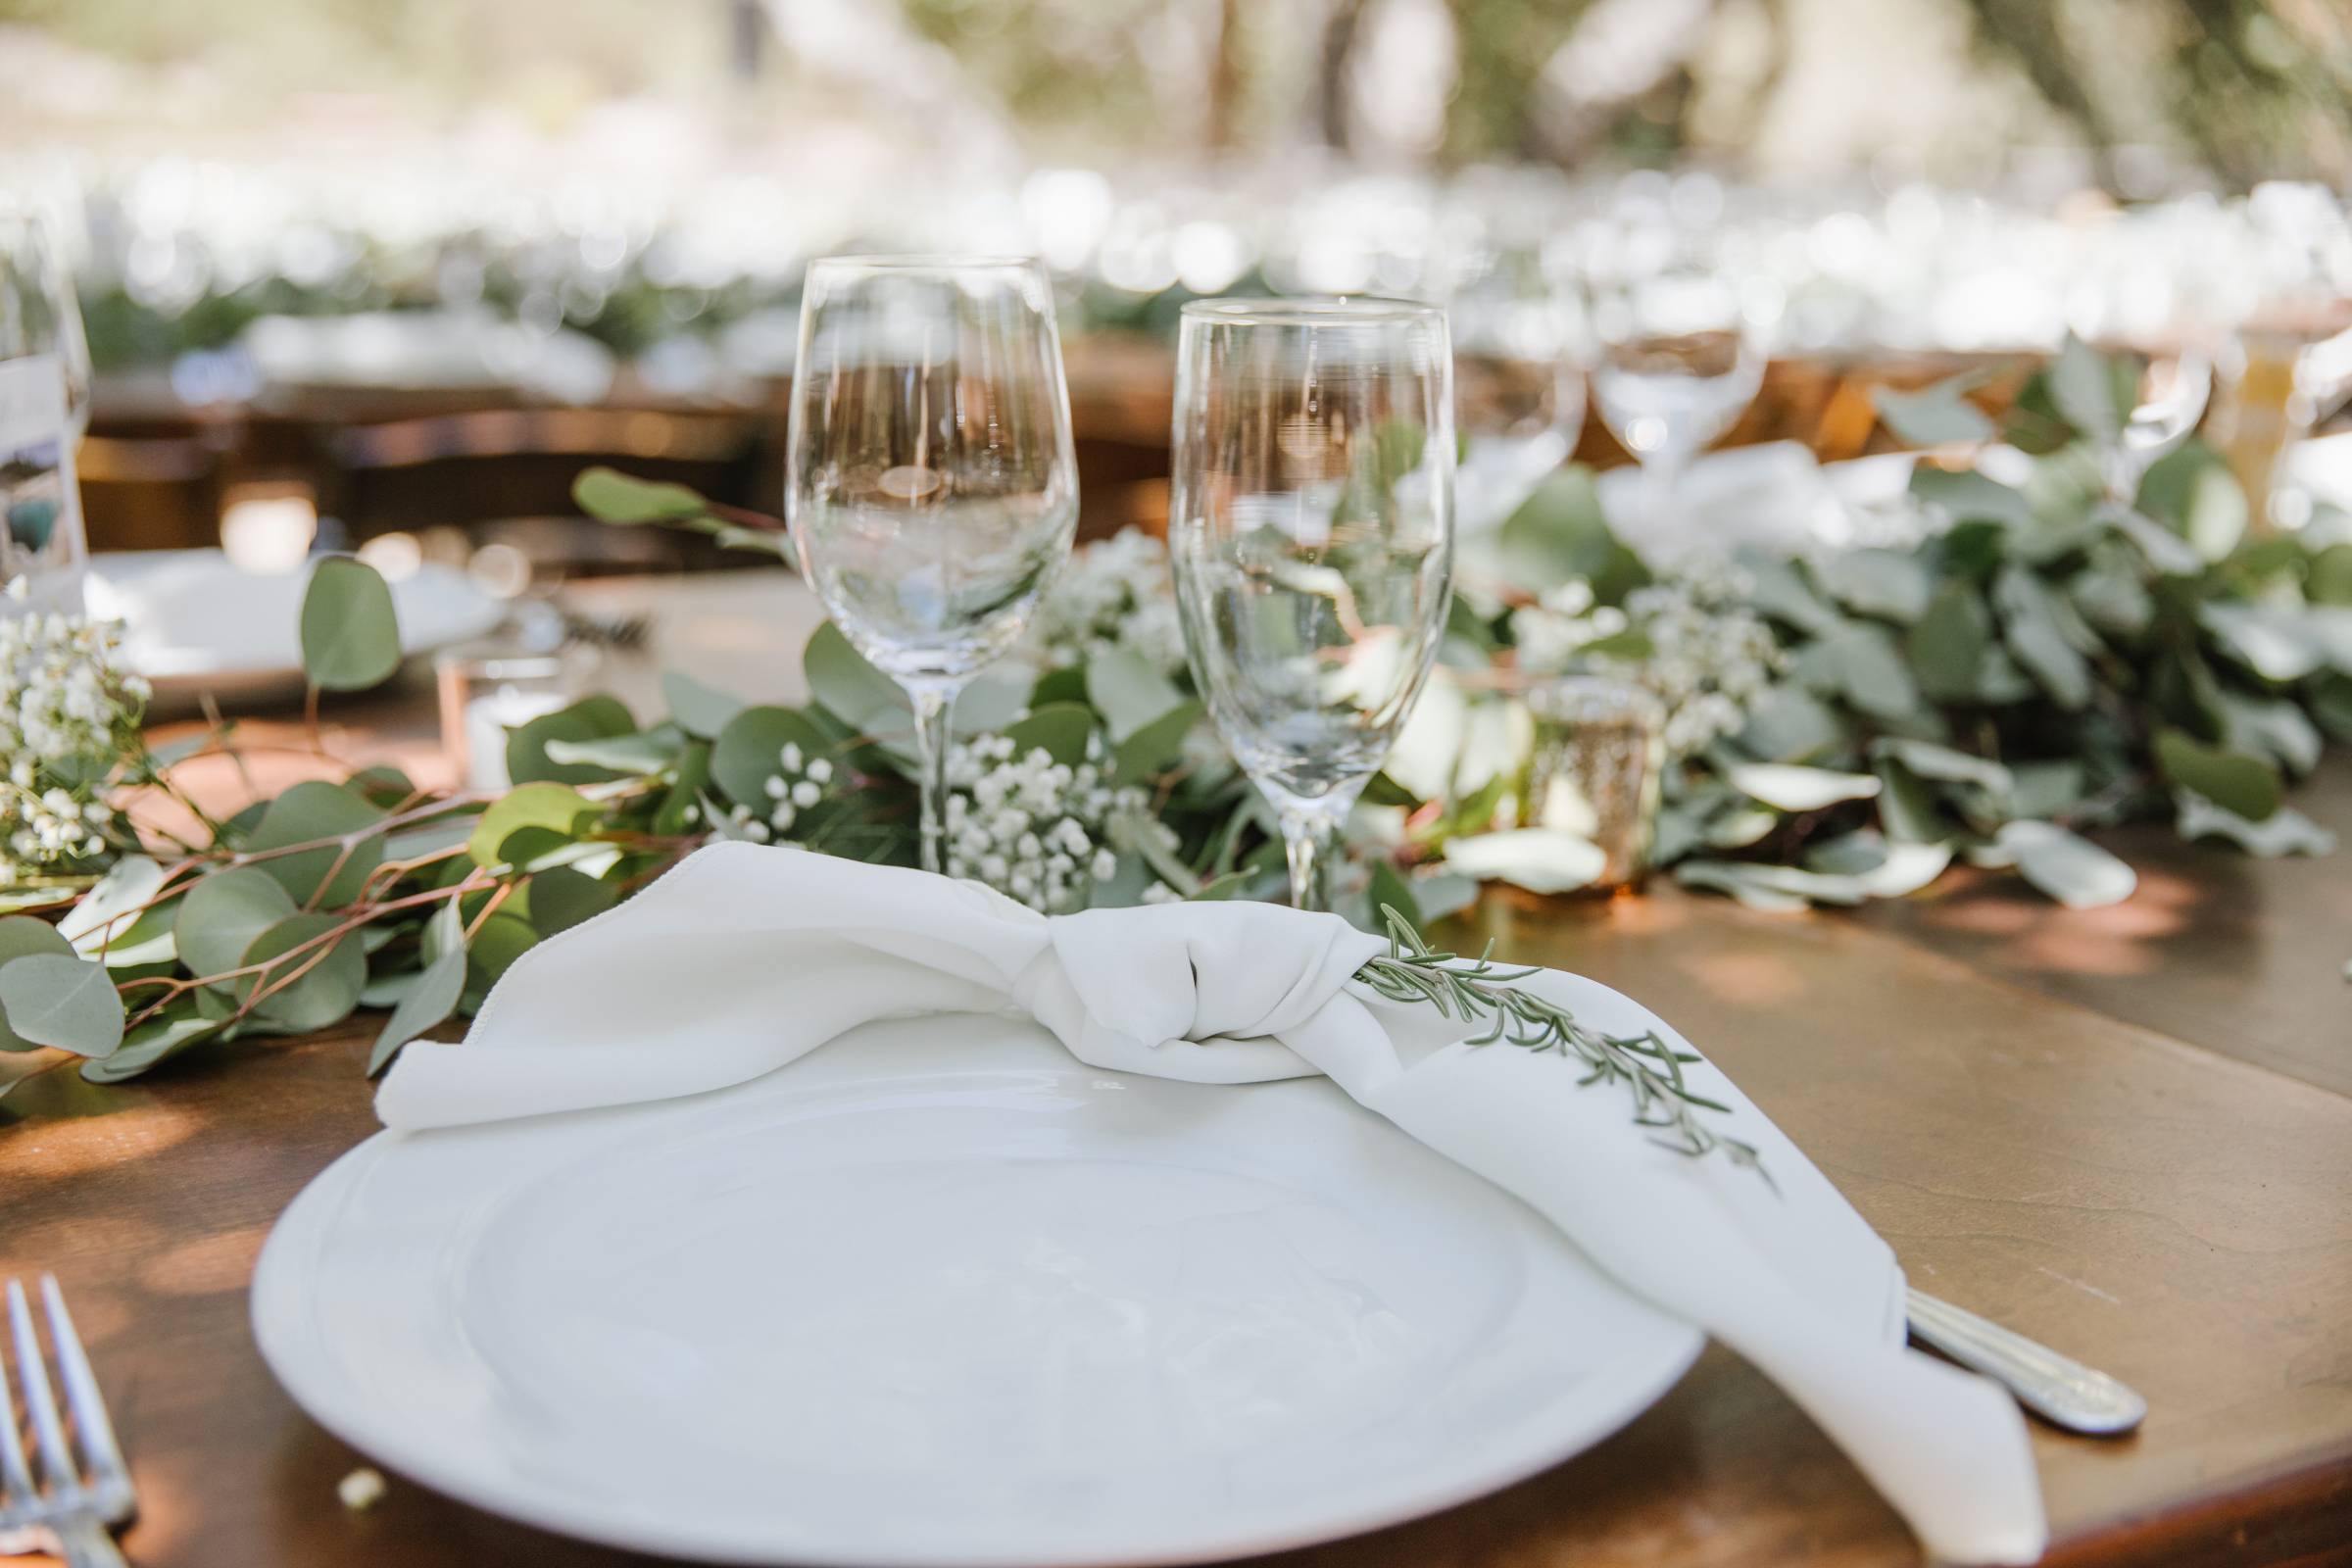 table, place setting, glassware, napkin, plate, greenery